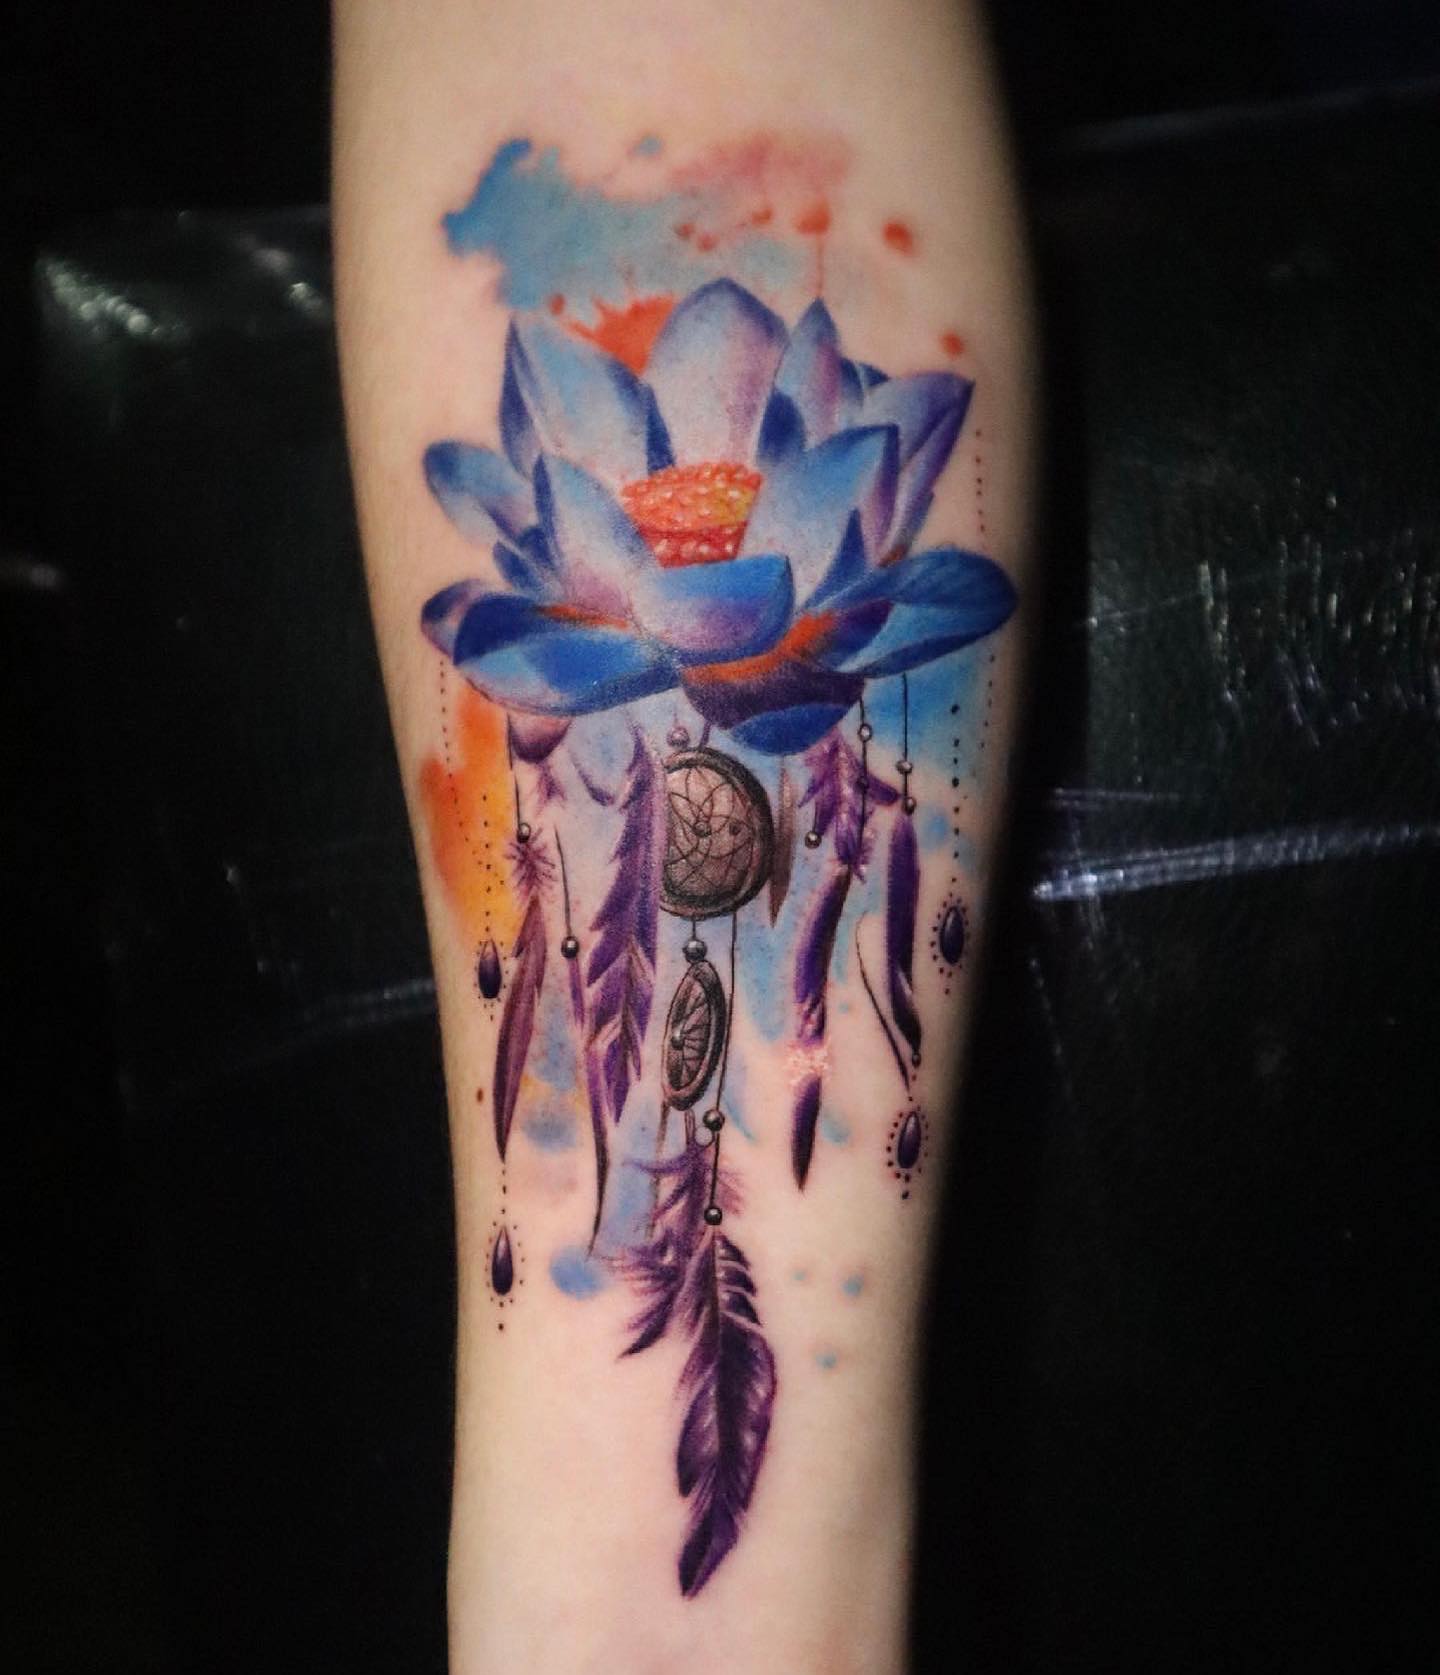 The lotus flower is a symbol of spiritual awakening and enlightenment. Thus, a lotus dream catcher tattoo is a tattoo that symbolizes the awakening of one's spirituality, or a journey to find it. Wanna get this fabulous tattoo? Let's do it as soon as possible.